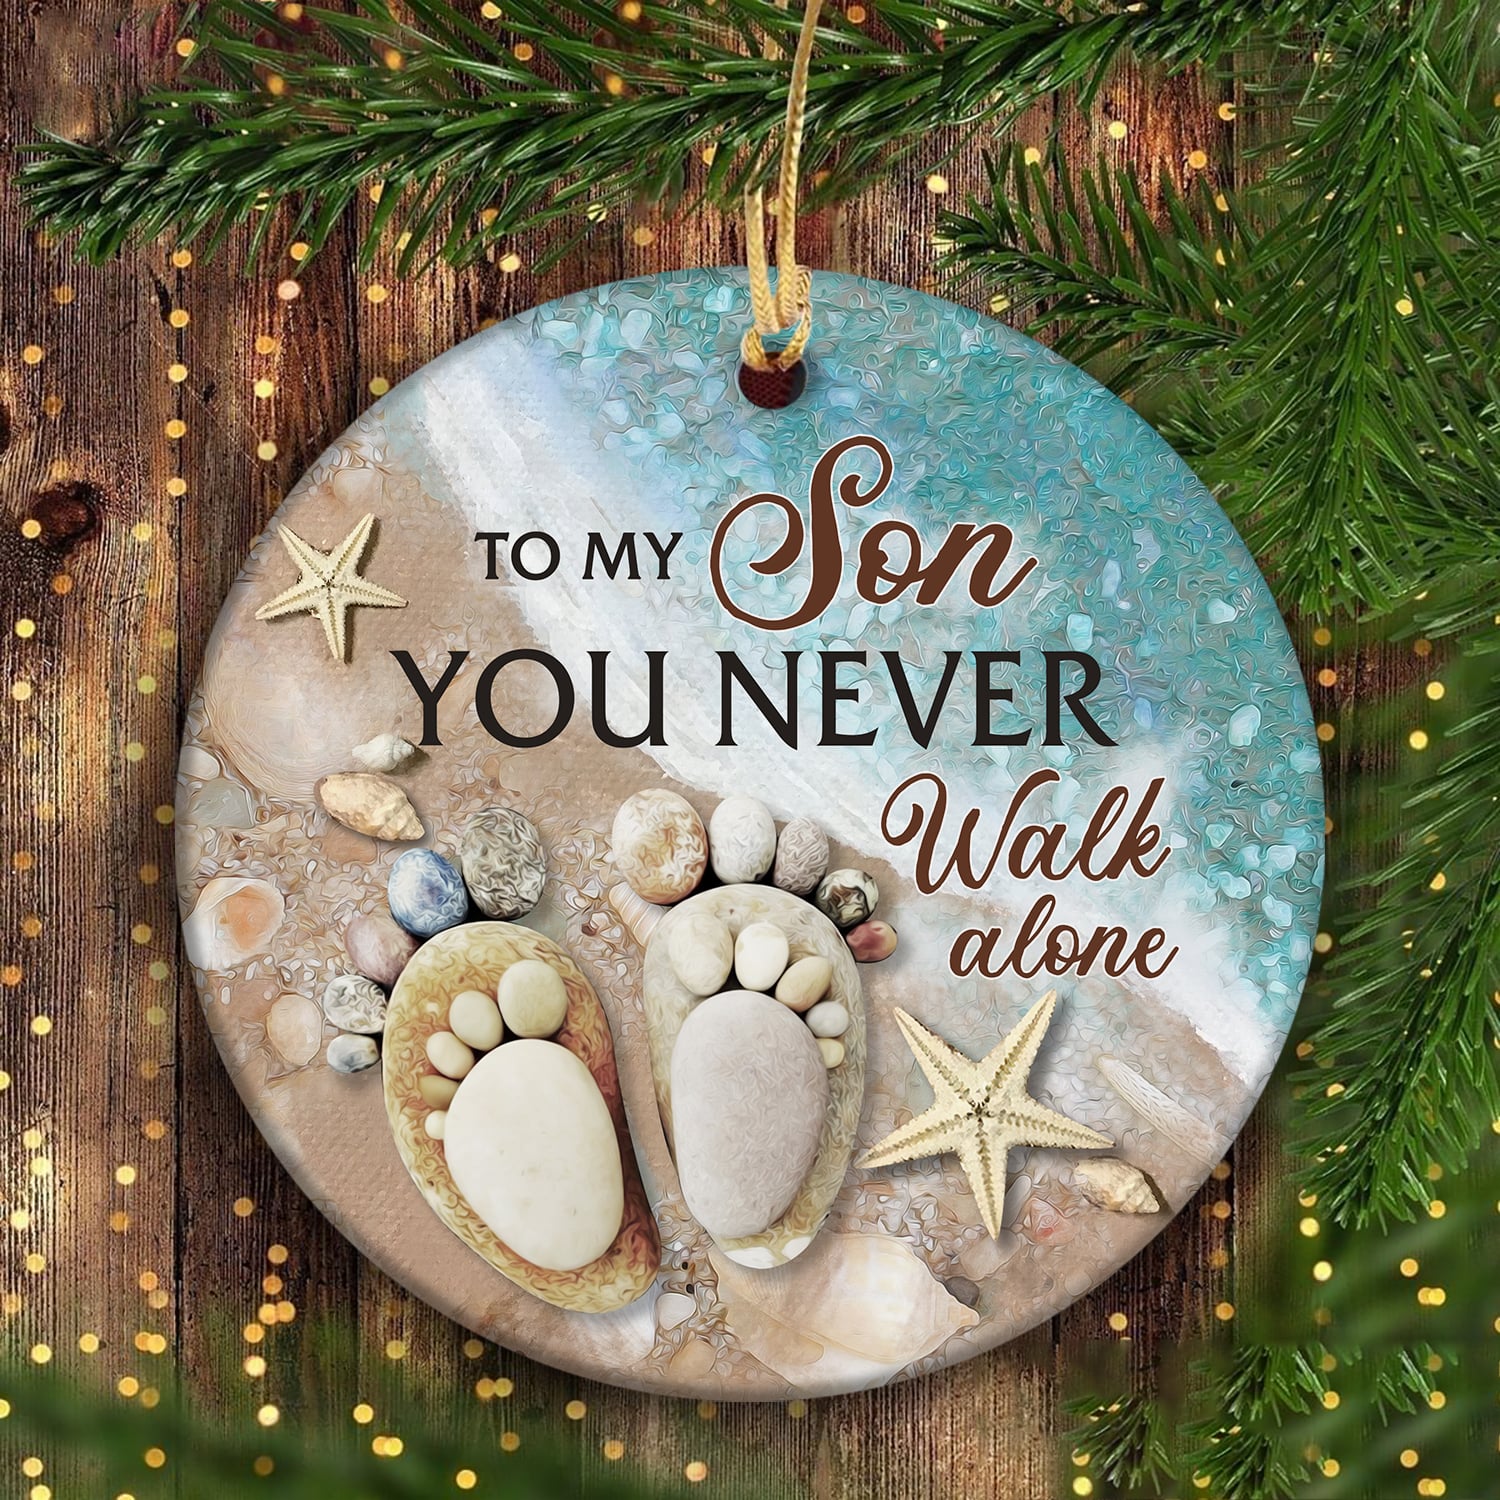 To my son, Pebble footprints, You never walk alone - Family Circle Ceramic Ornament